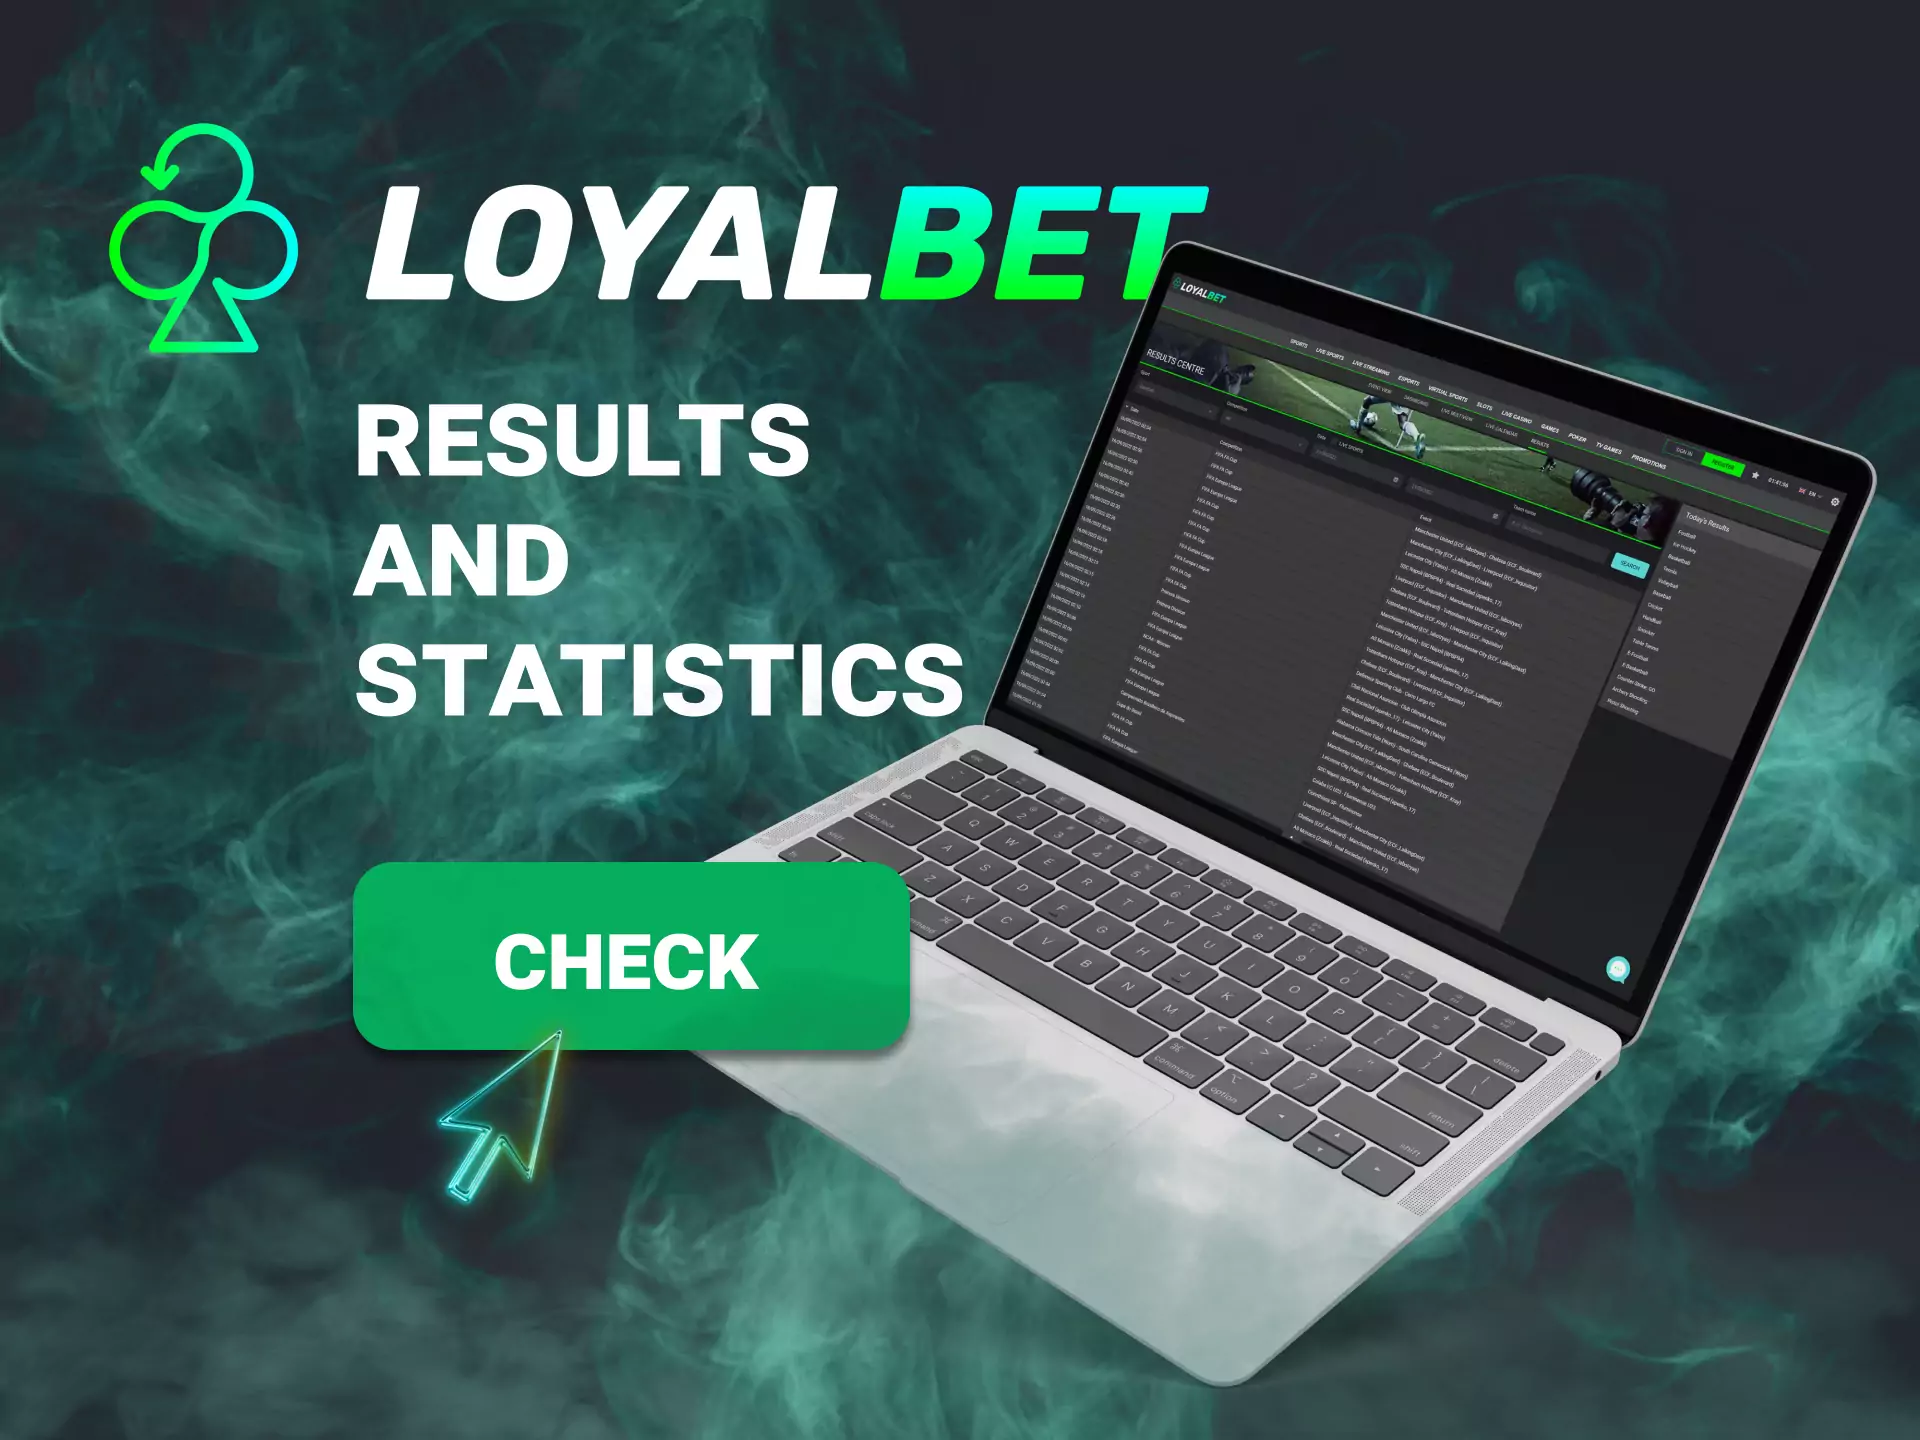 After a match, you can check the results right on the Loyalbet website.